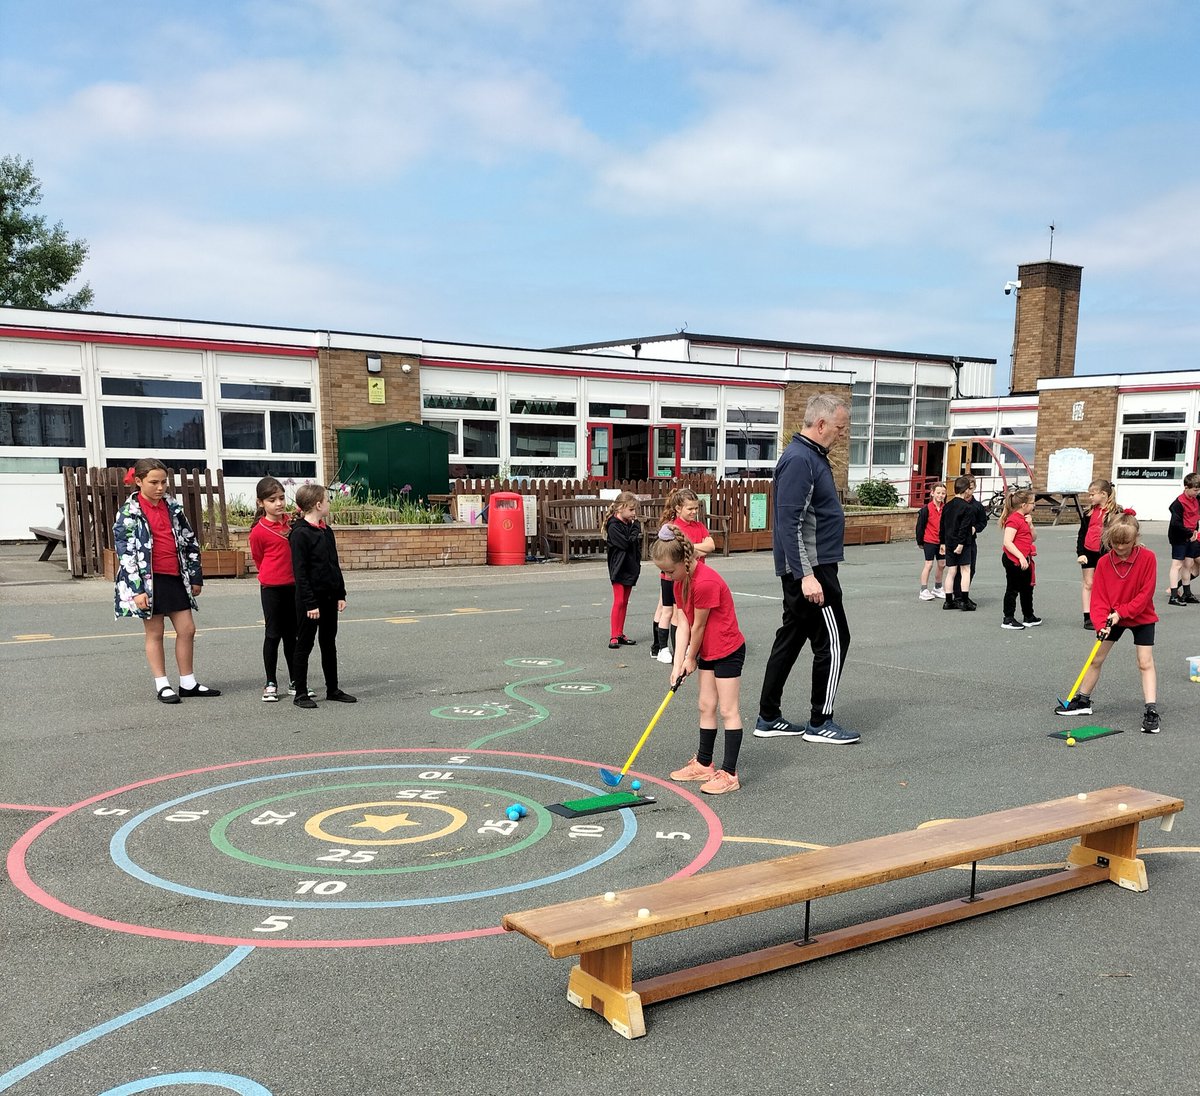 Lots of healthy confident individuals in Yr 3 as they practised golf and basketball skills in PE #YBHYEAR3 #YBHHCI